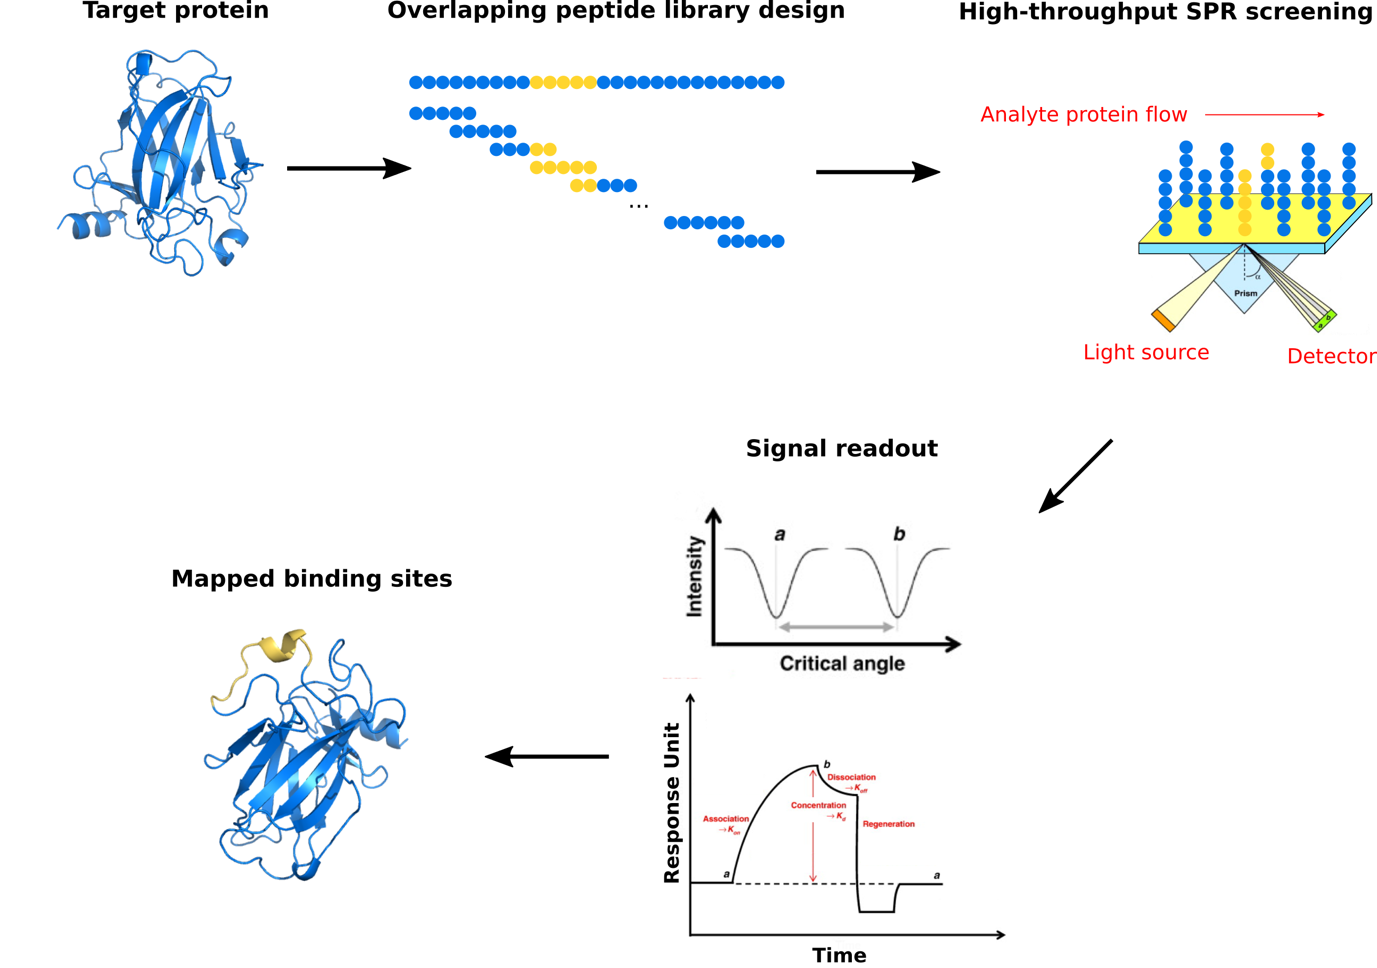 Protein binding site mapping procedures